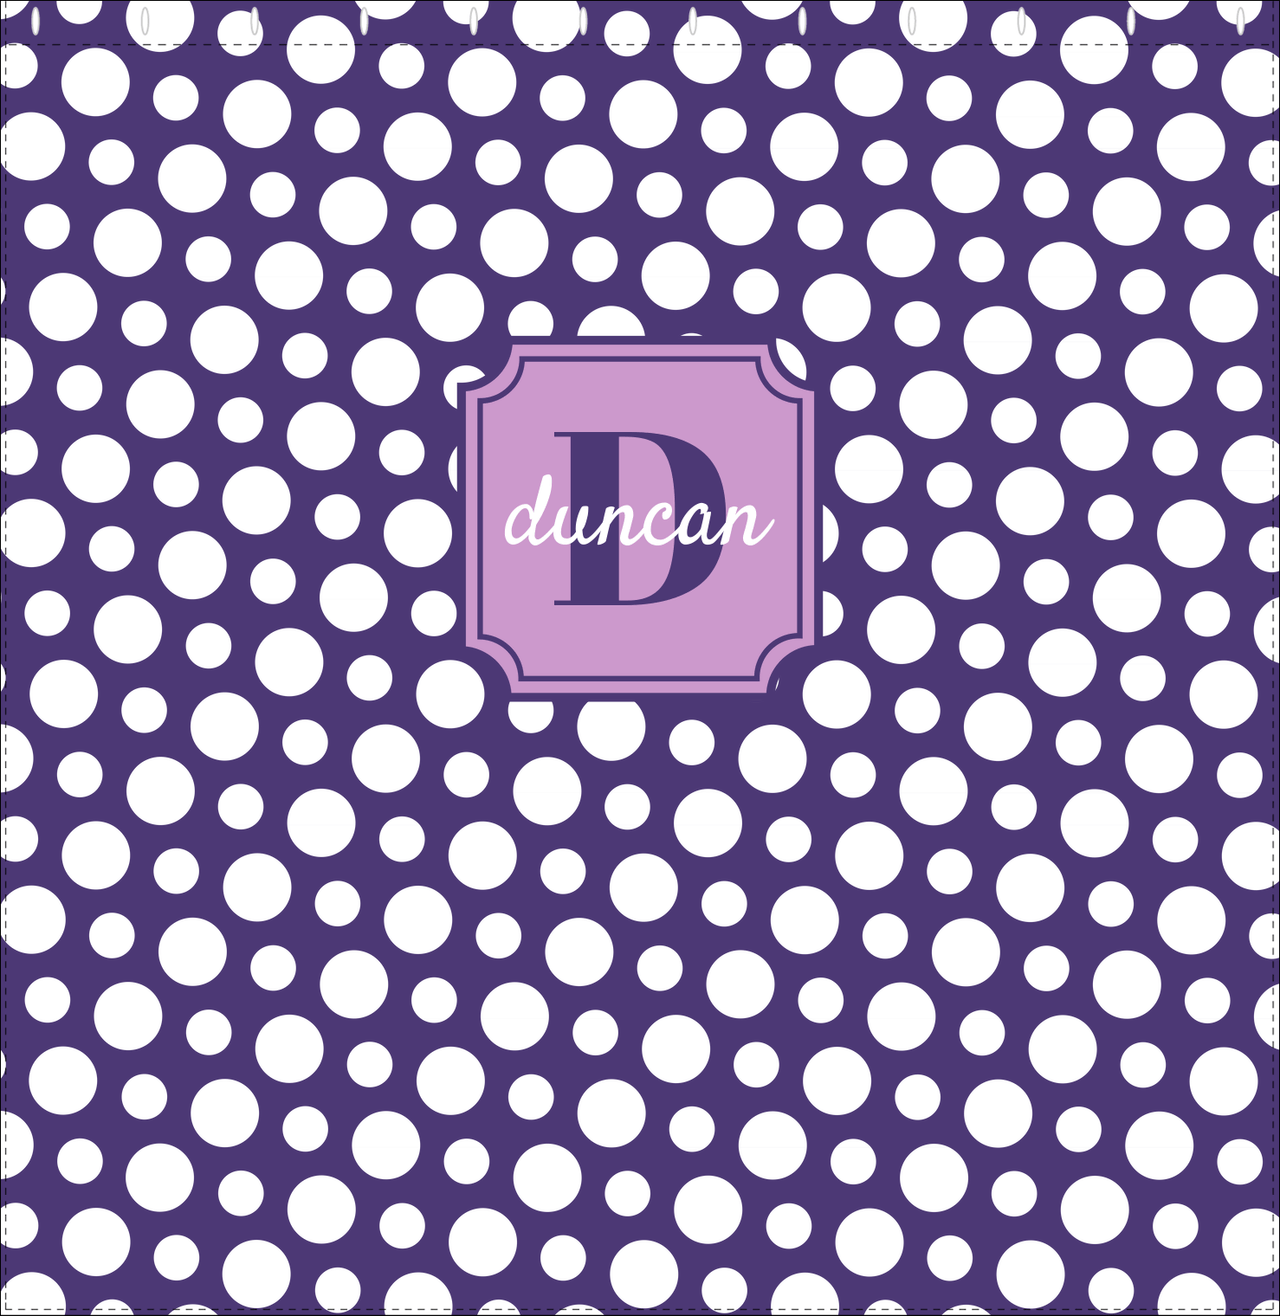 Personalized Polka Dots Shower Curtain - Purple - Stamp Nameplate - Decorate View